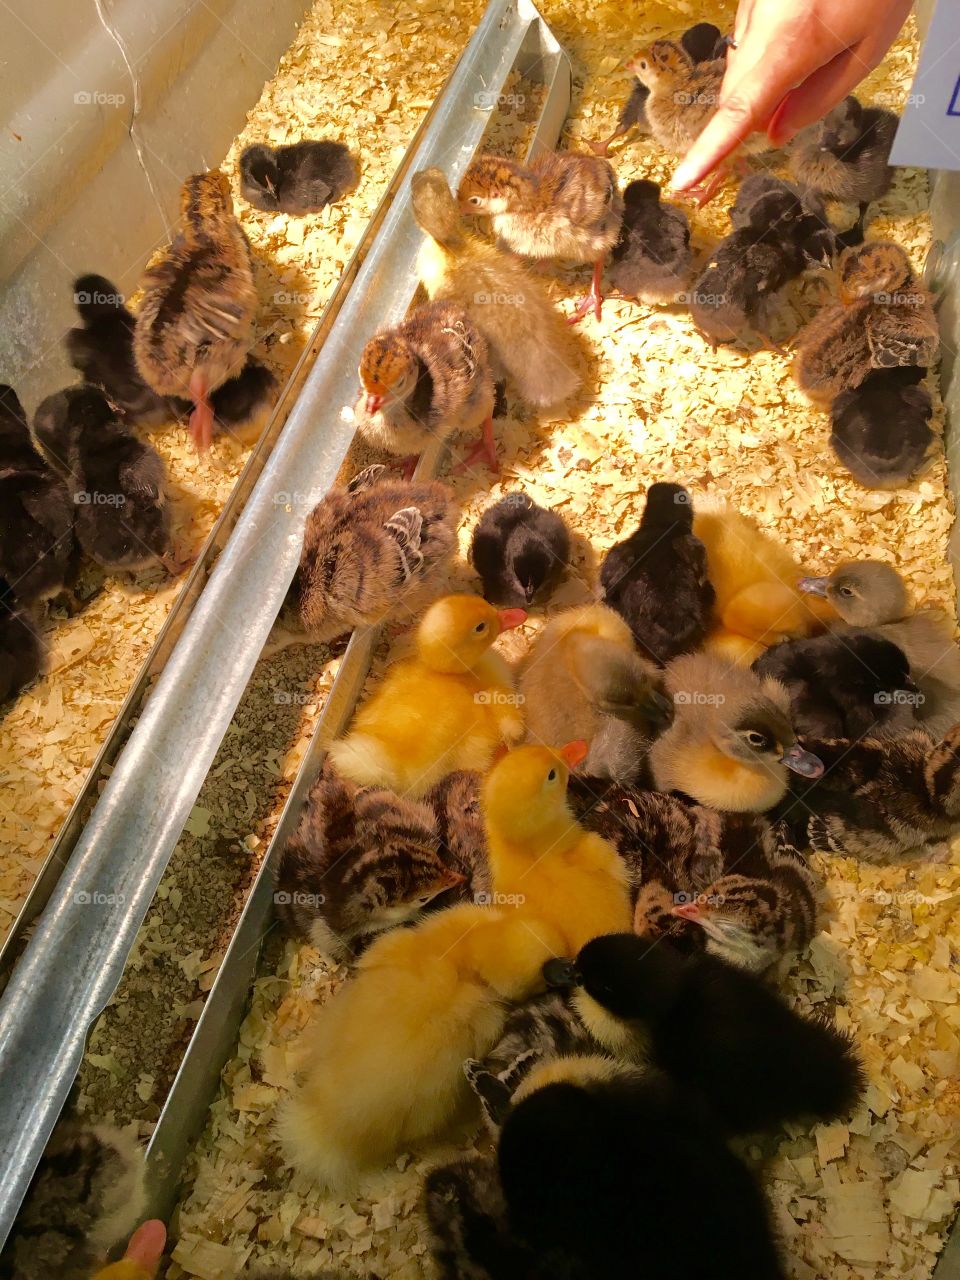 Baby chickens and ducks 